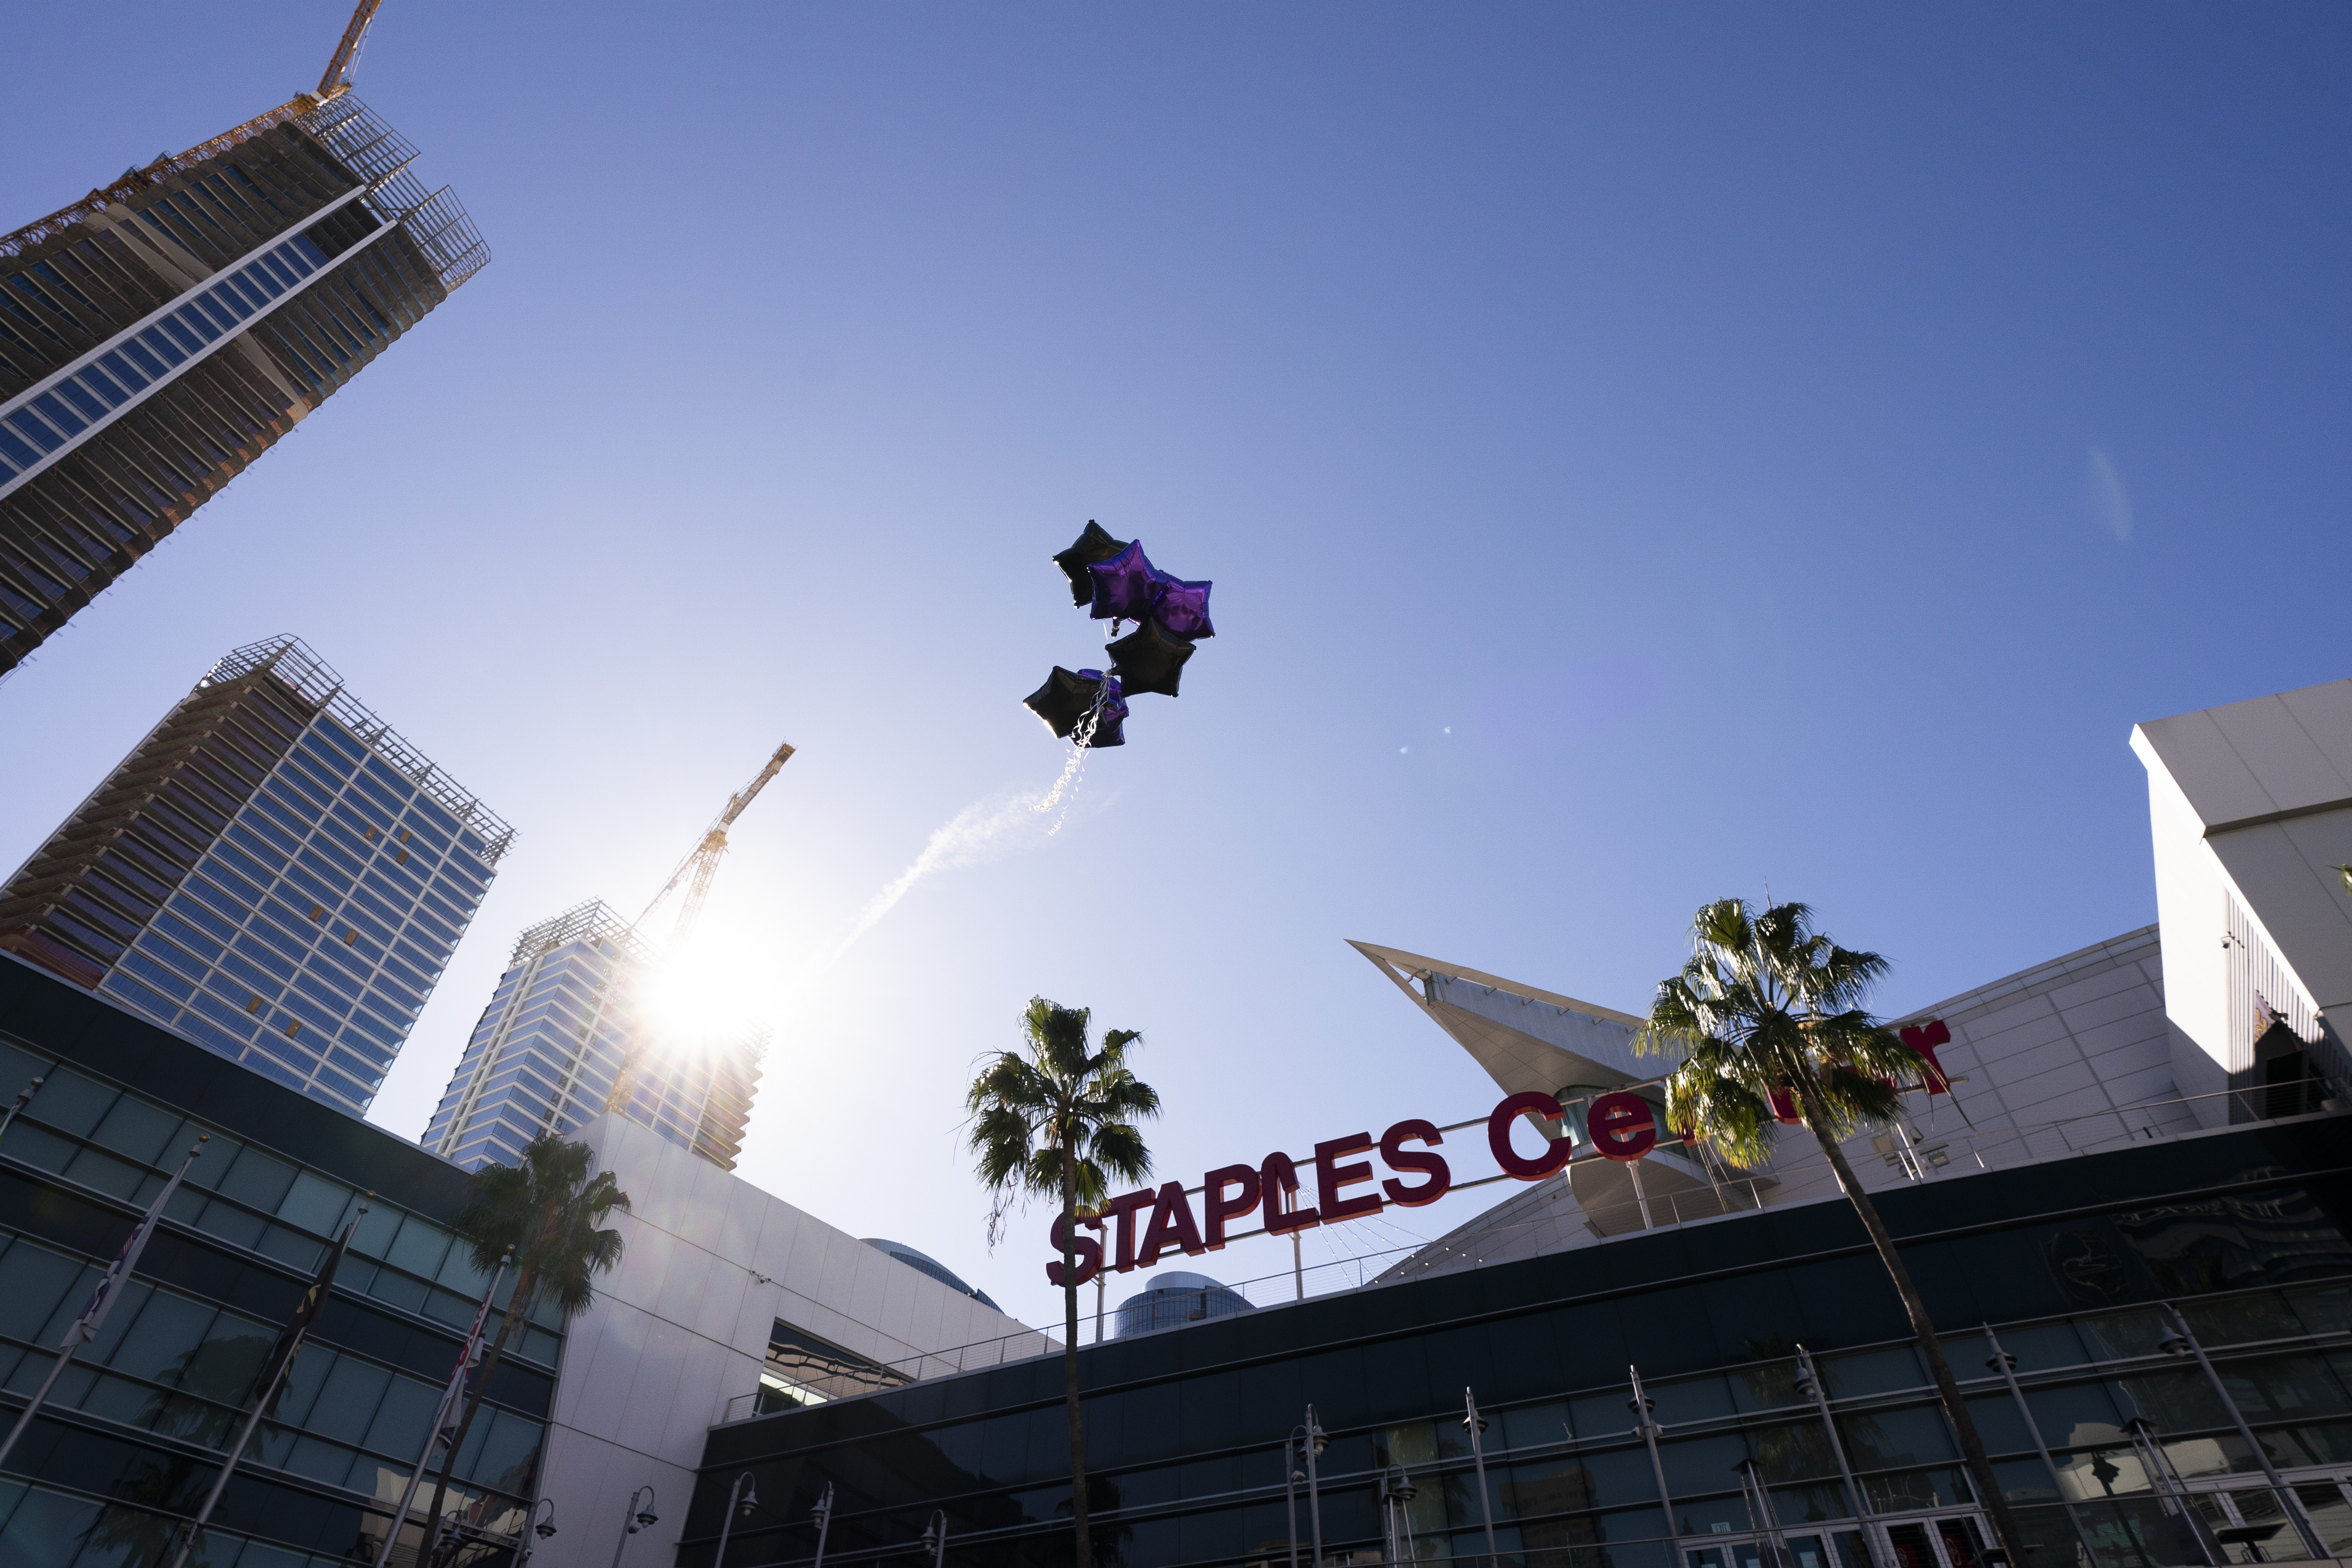 Staples Center is changing its name to Crypto.com Arena